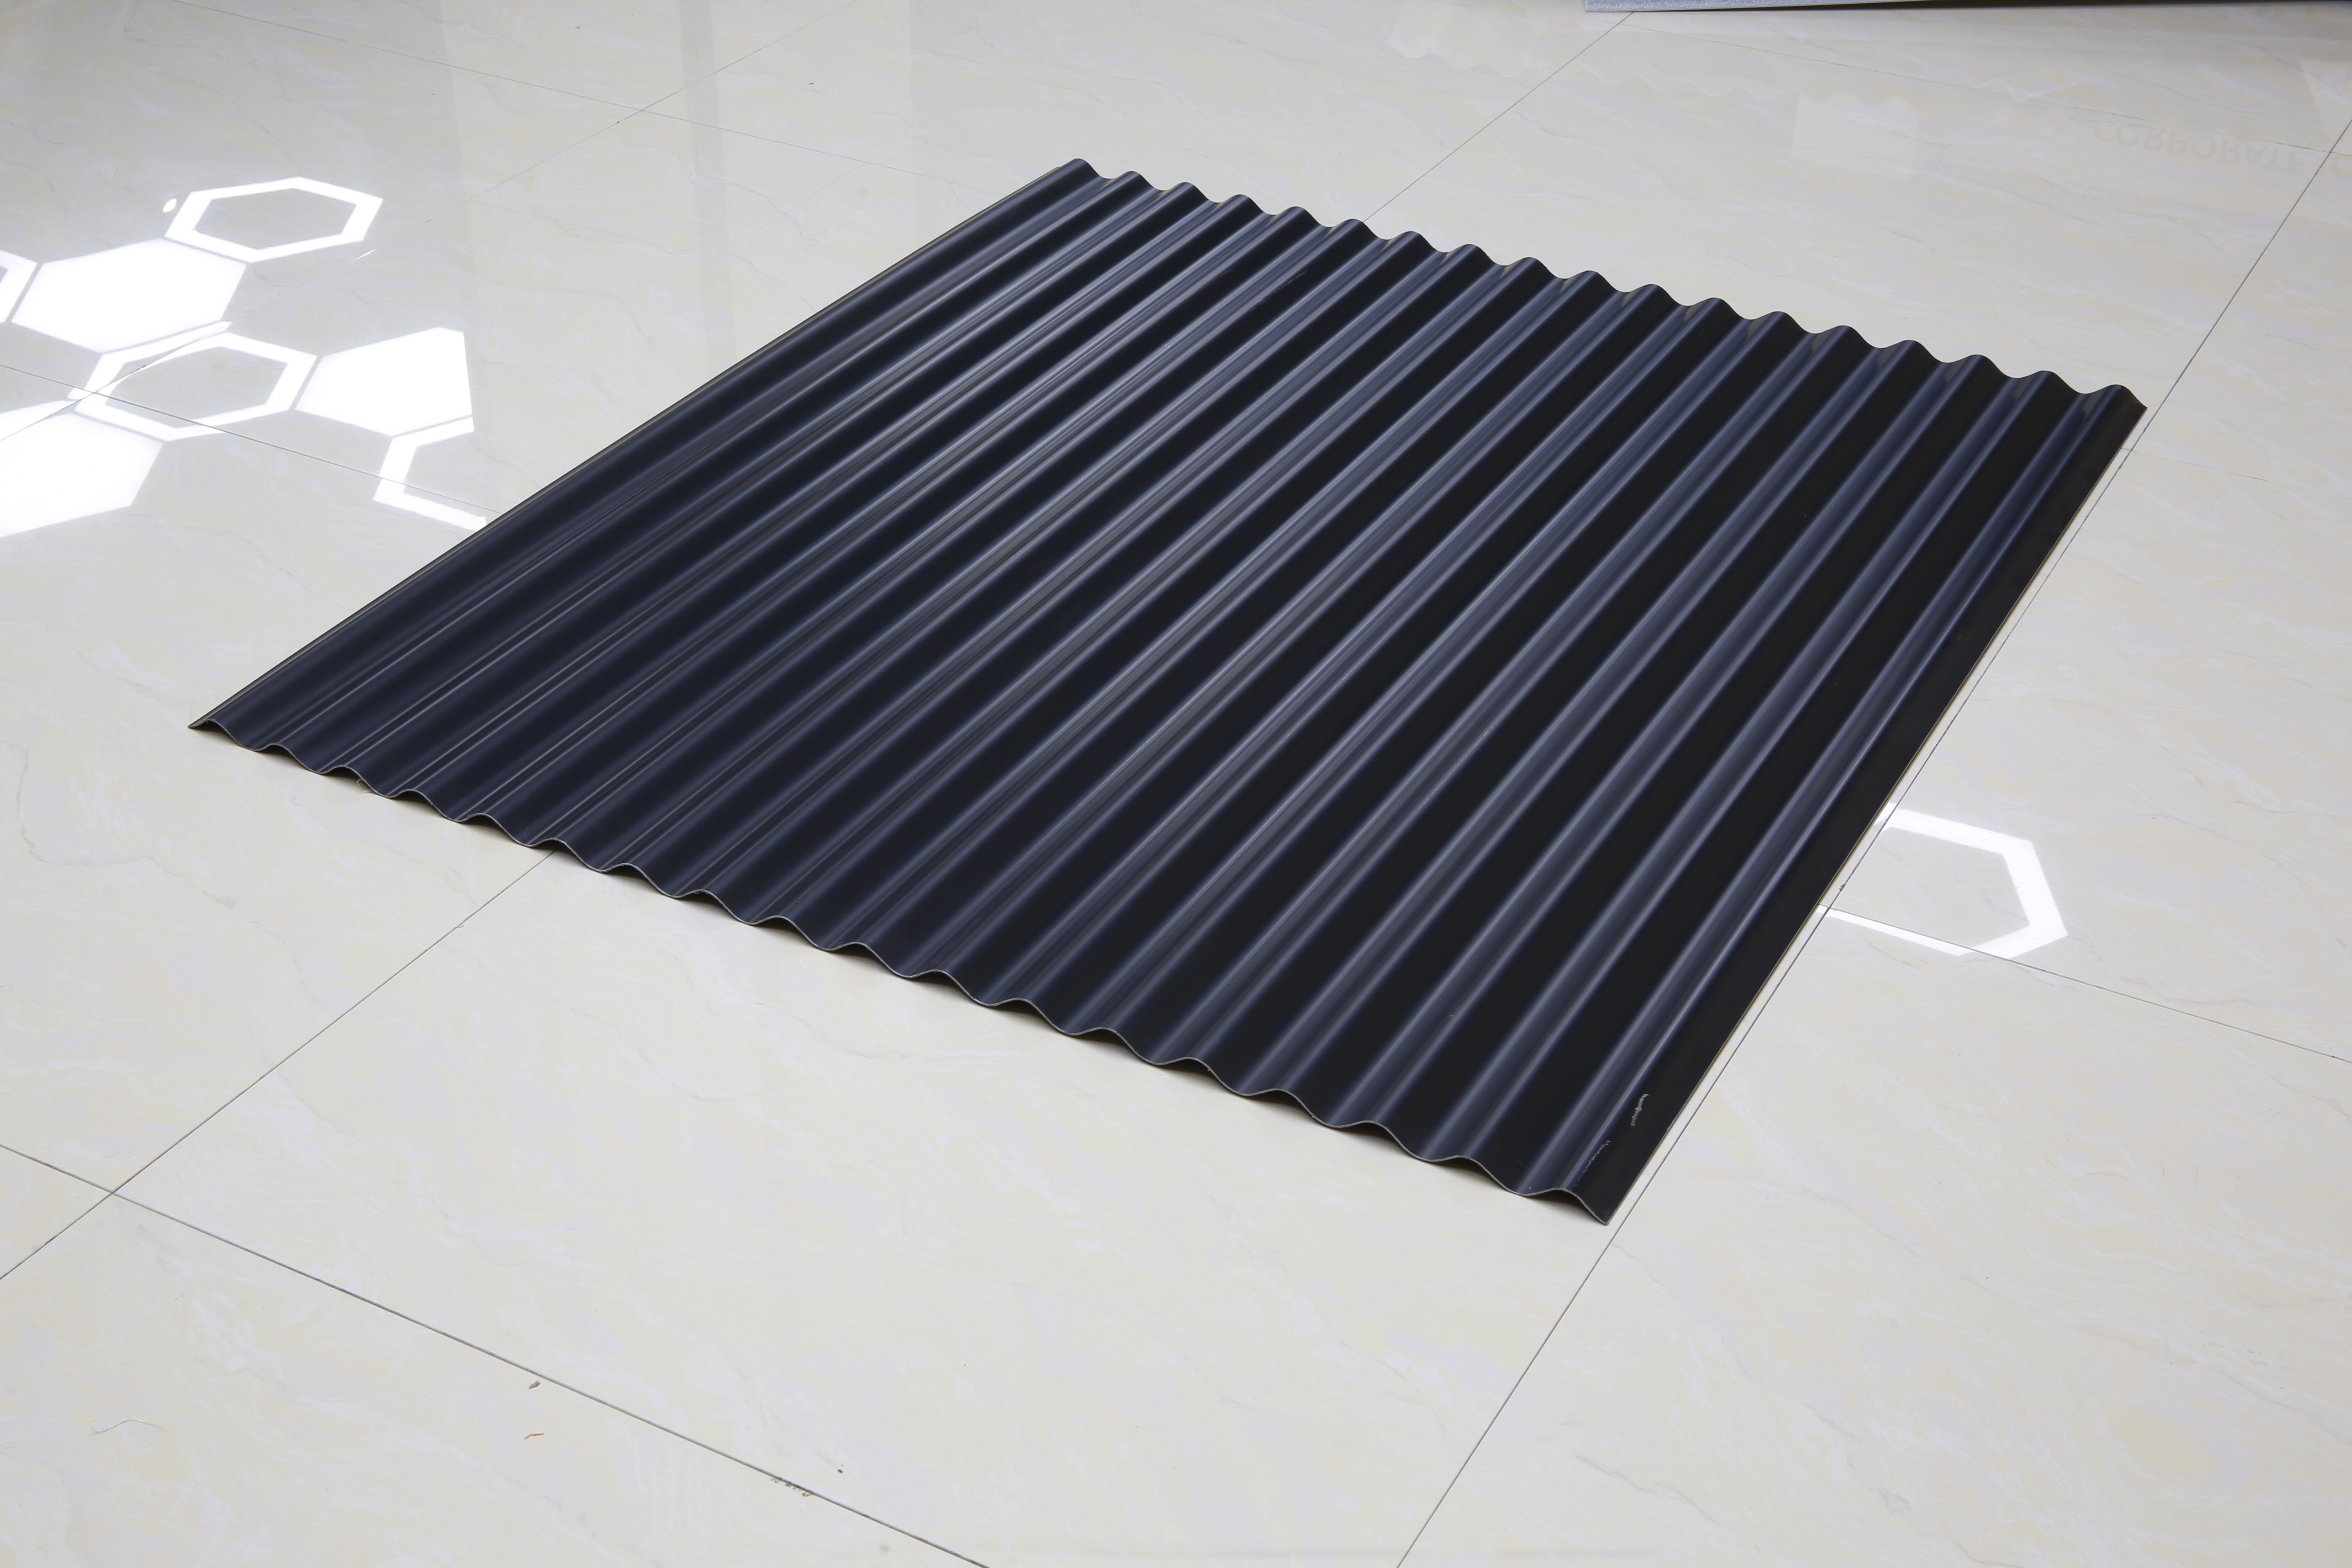 Hot sale good sound proof wave pvc plastic roof tile asa upvc roof sheet for wall cladding